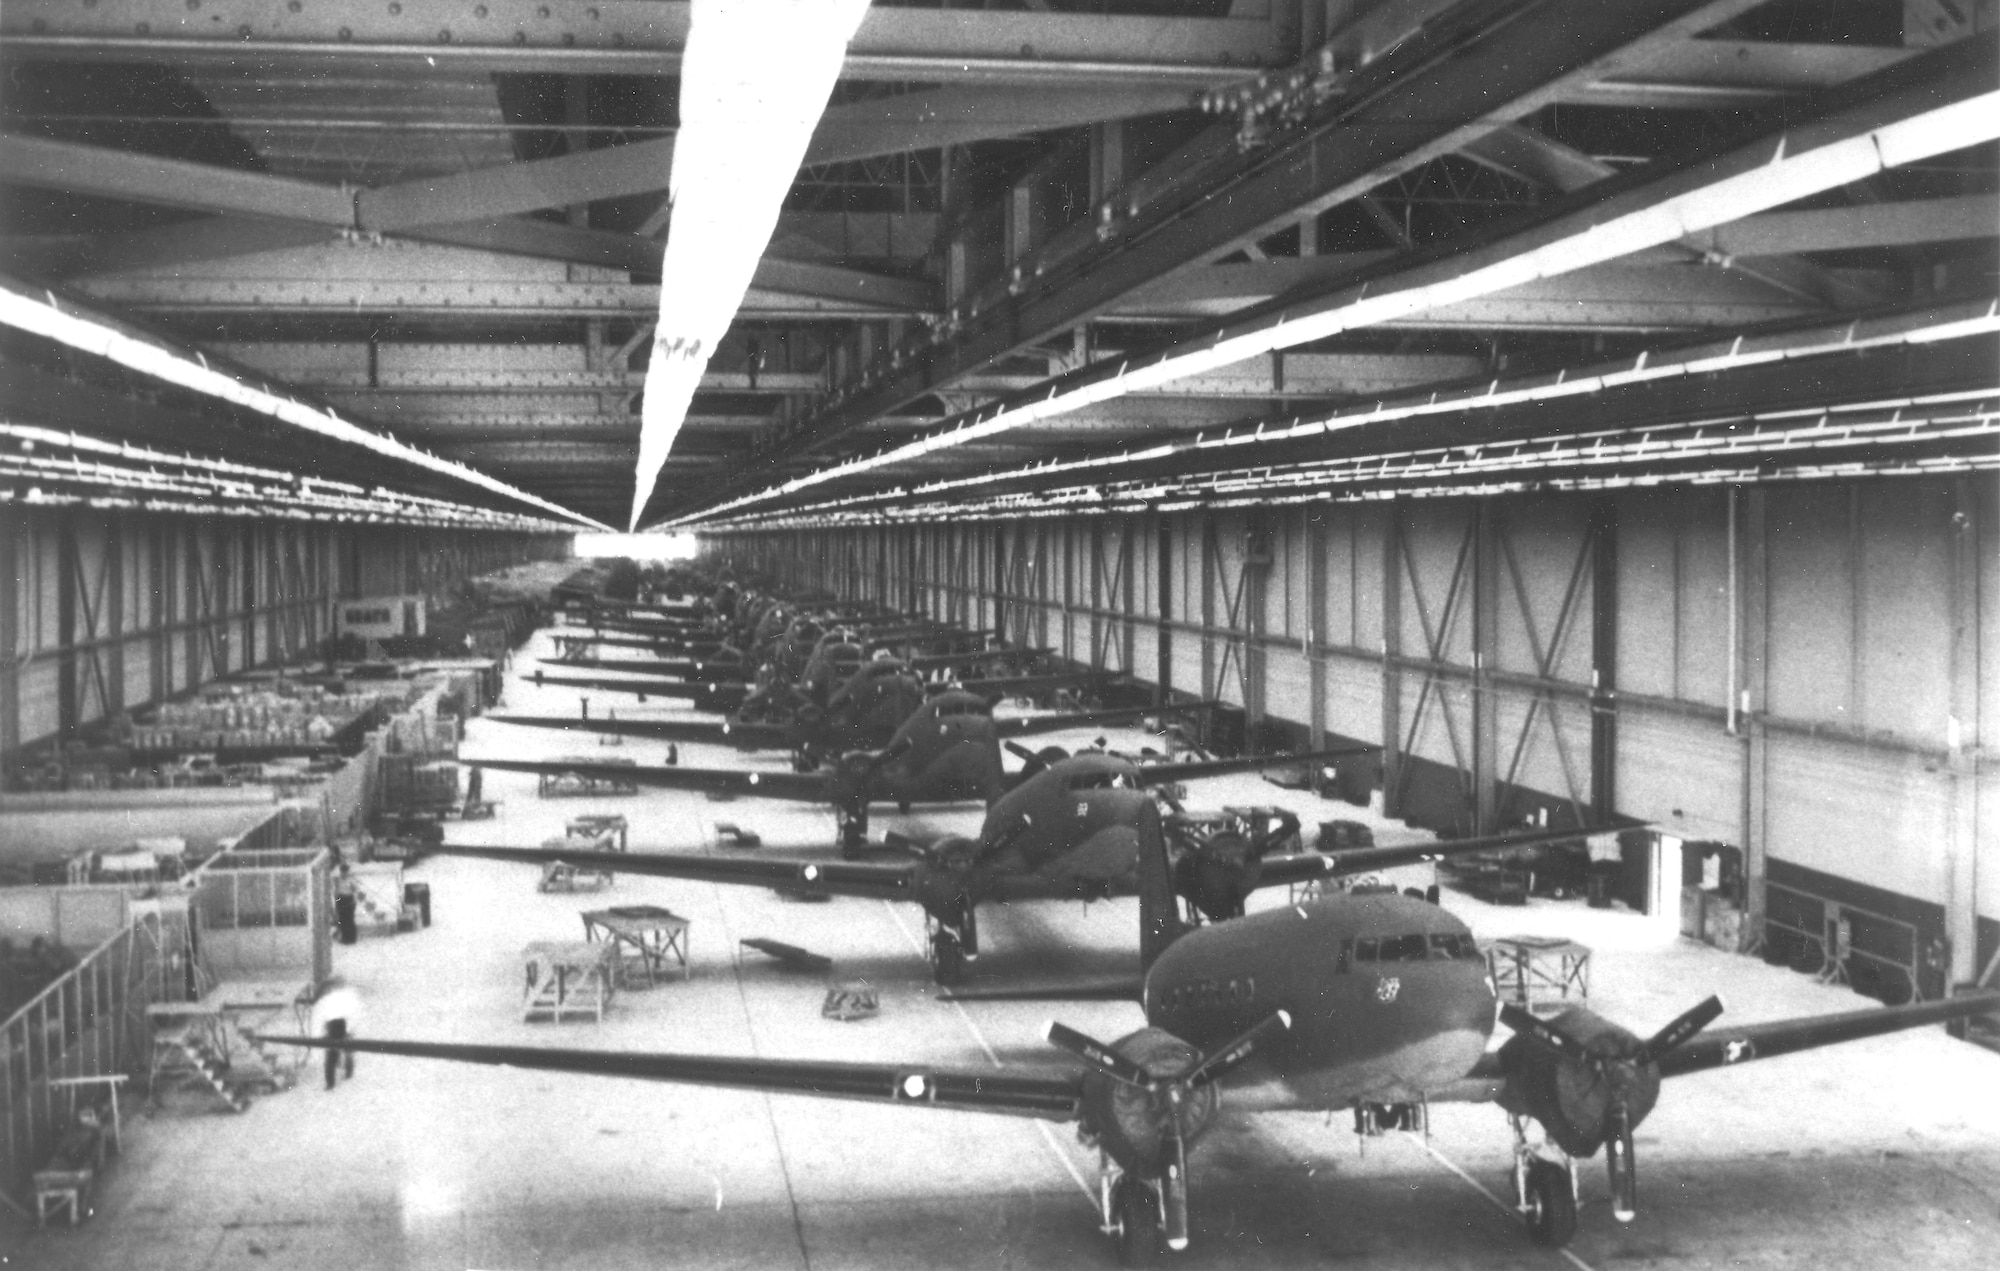 Here stands a C-47 line in OKC Douglas Plant, Bldg. 3001 in 1943.